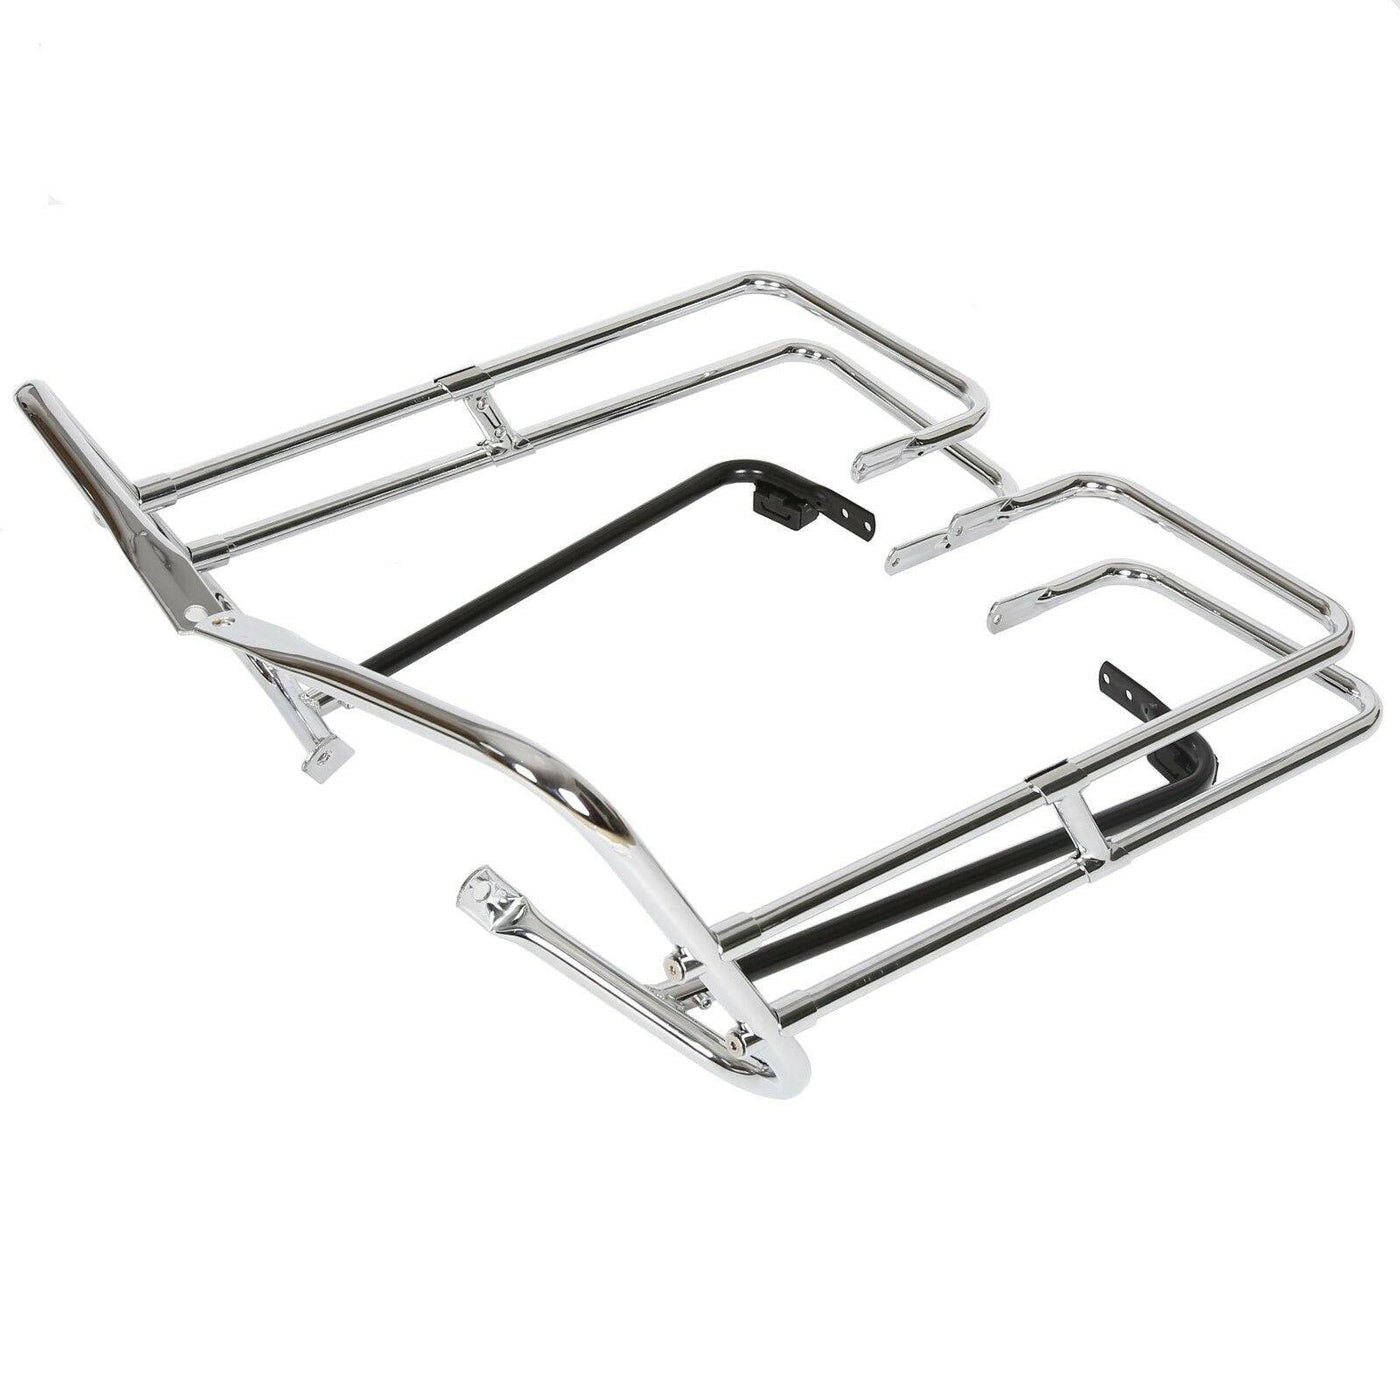 Saddle Bag Guard Rail Bracket For Harley Touring CVO Ultra Classic Electra Glide - Moto Life Products